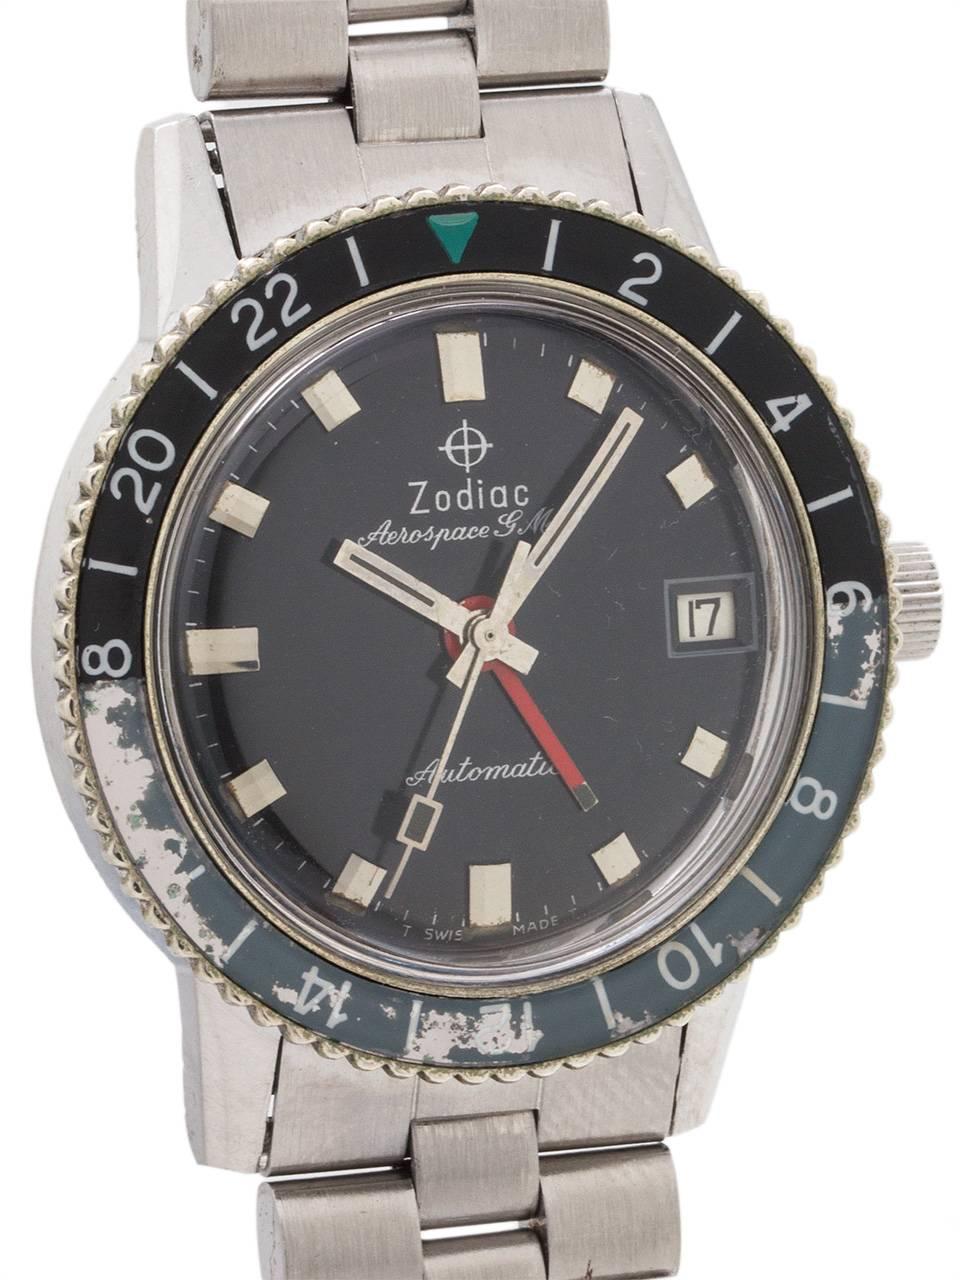 
Zodiac Stainless Steel Aerospace GMT automatic circa 1960’s. 36mm case with screw down case back, rotating 24 hour black and blue/gray acrylic bezel with green triangle 24 hour index, and a loss of color from 16-18. Glossy black original dial with